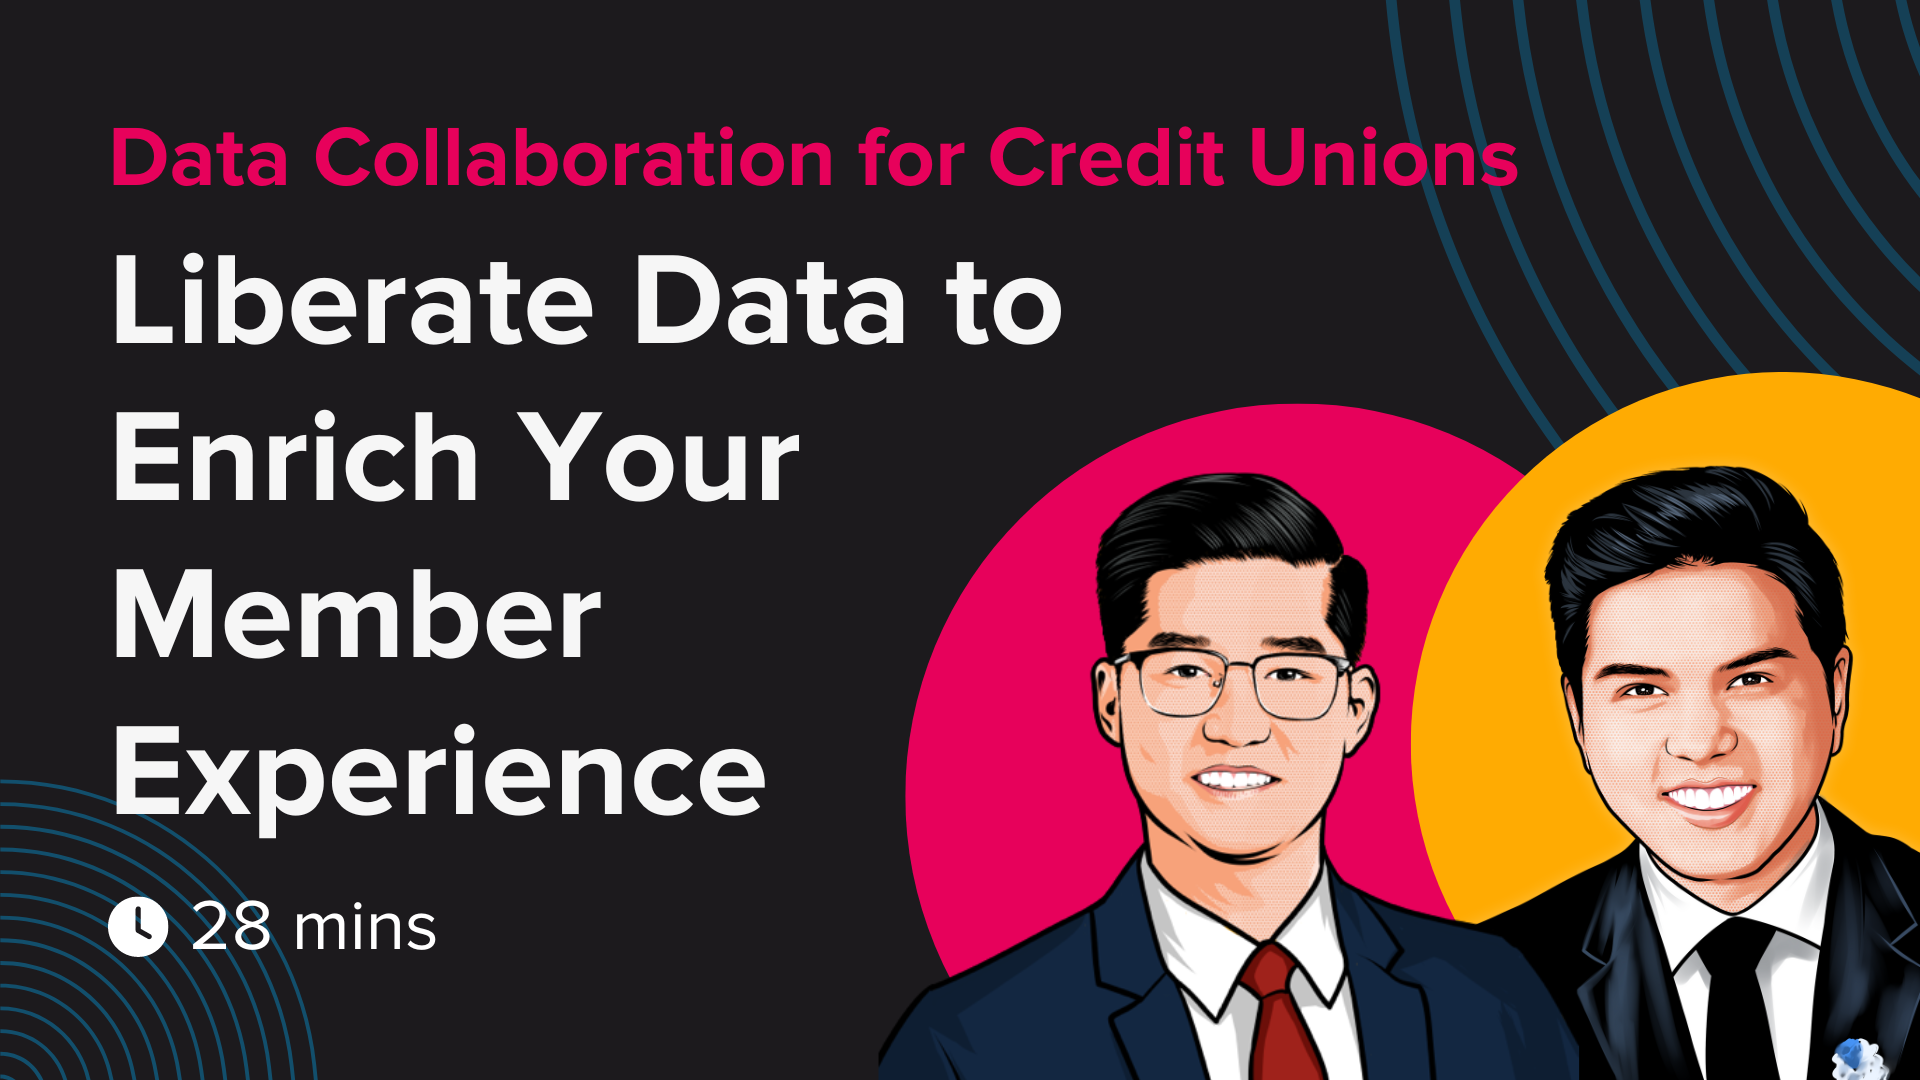 Data Collaboration for Credit Unions: Liberate Data to Enrich Your Member Experience